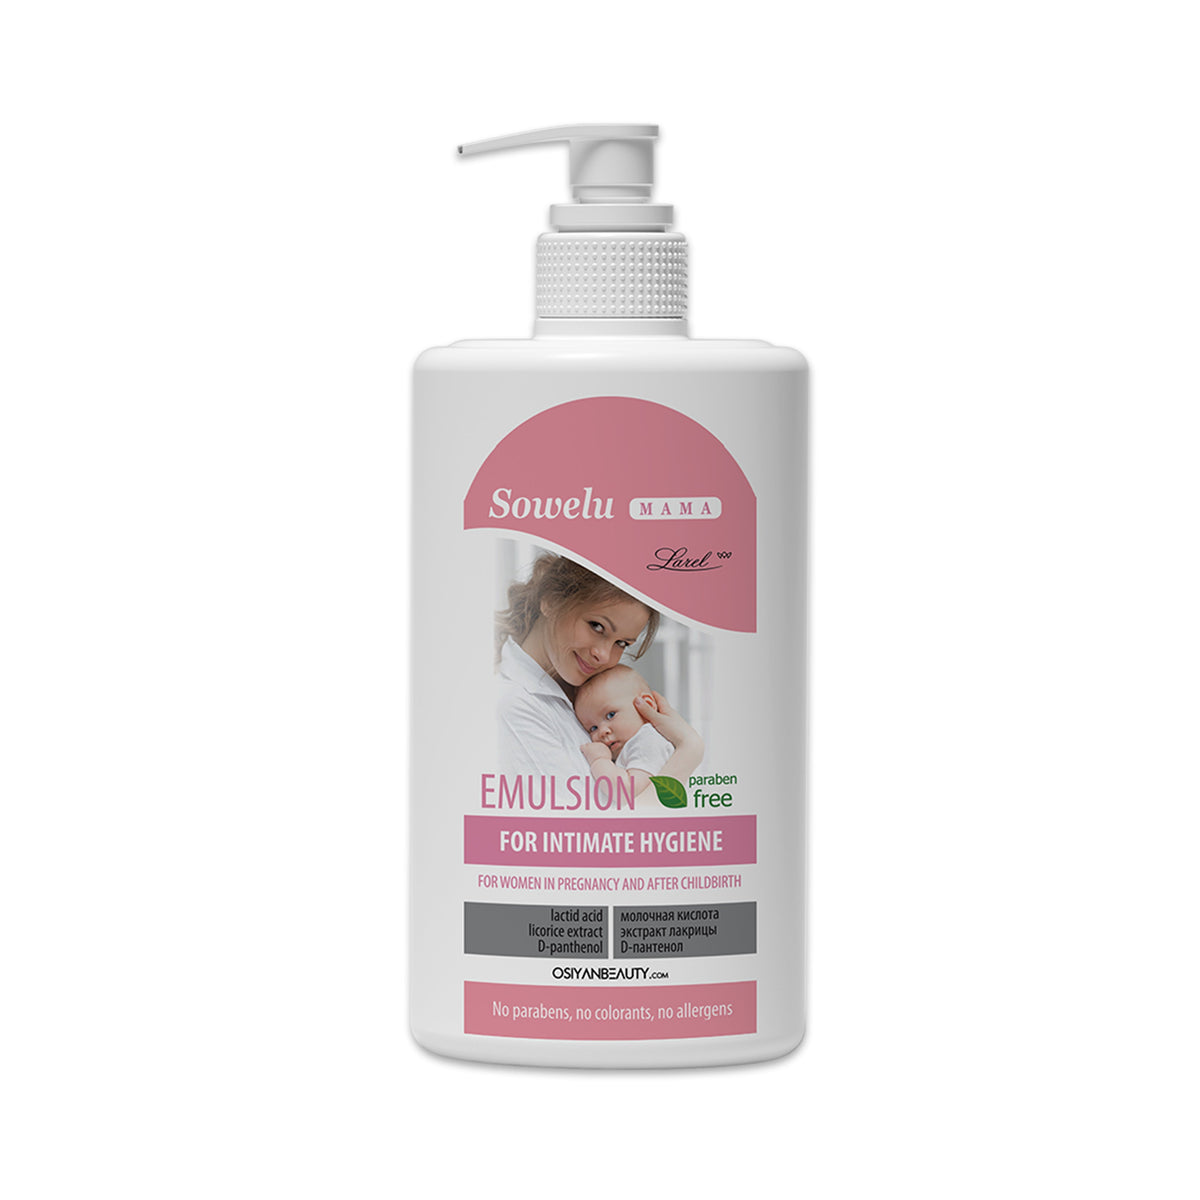 Emulsion for intimate hygiene for Sowelu mom's (made in Europe)